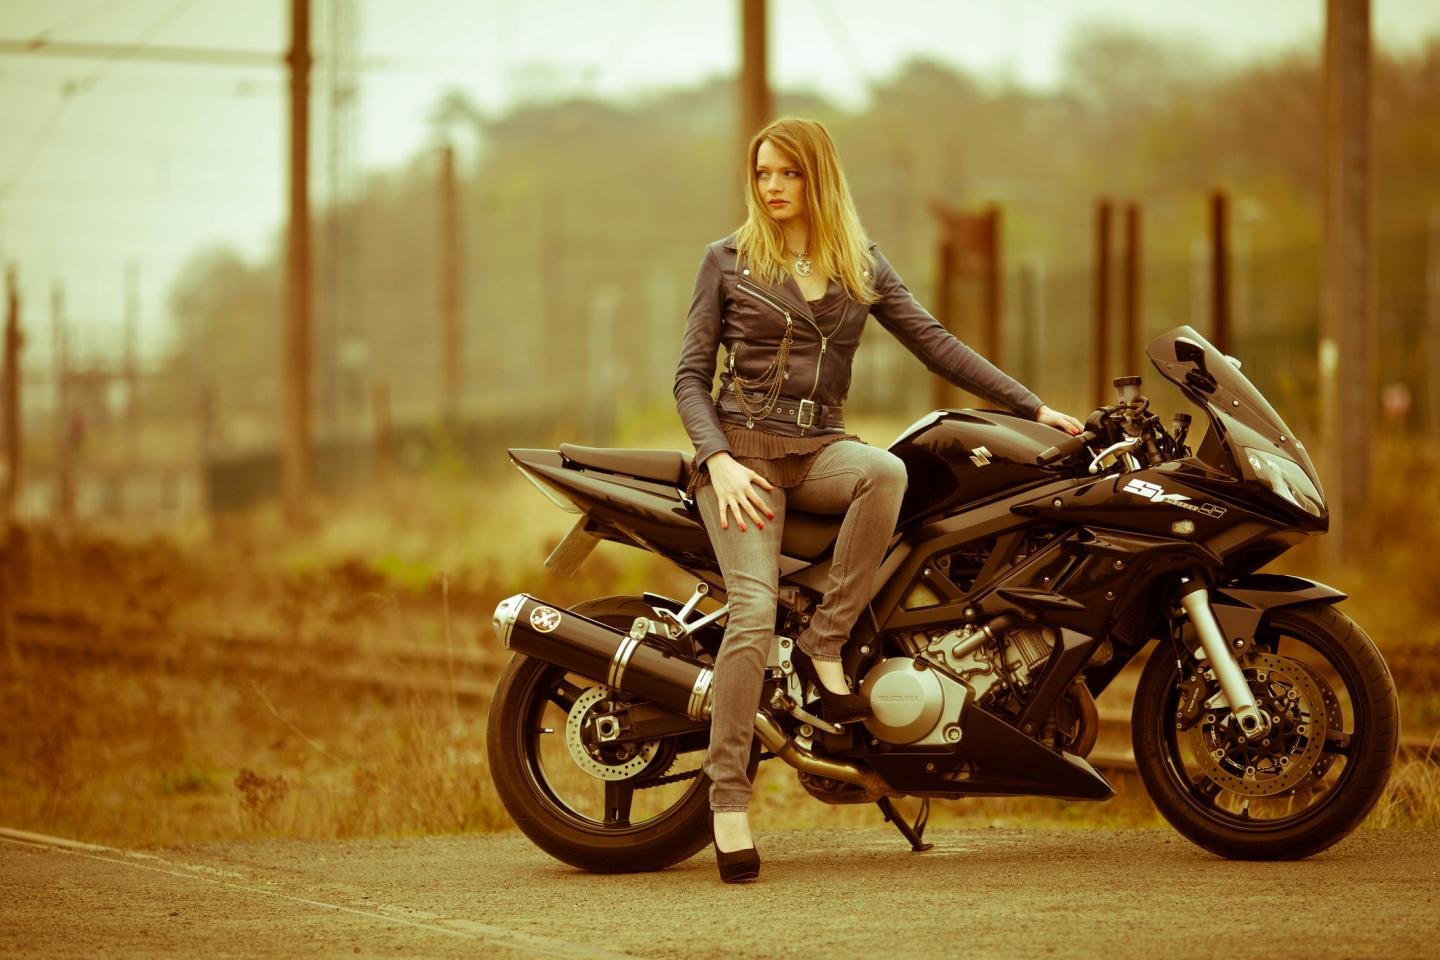 Awesome Girls and Bike (Motorcycles) free wallpaper ID:67100 for hd 1440x960 desktop